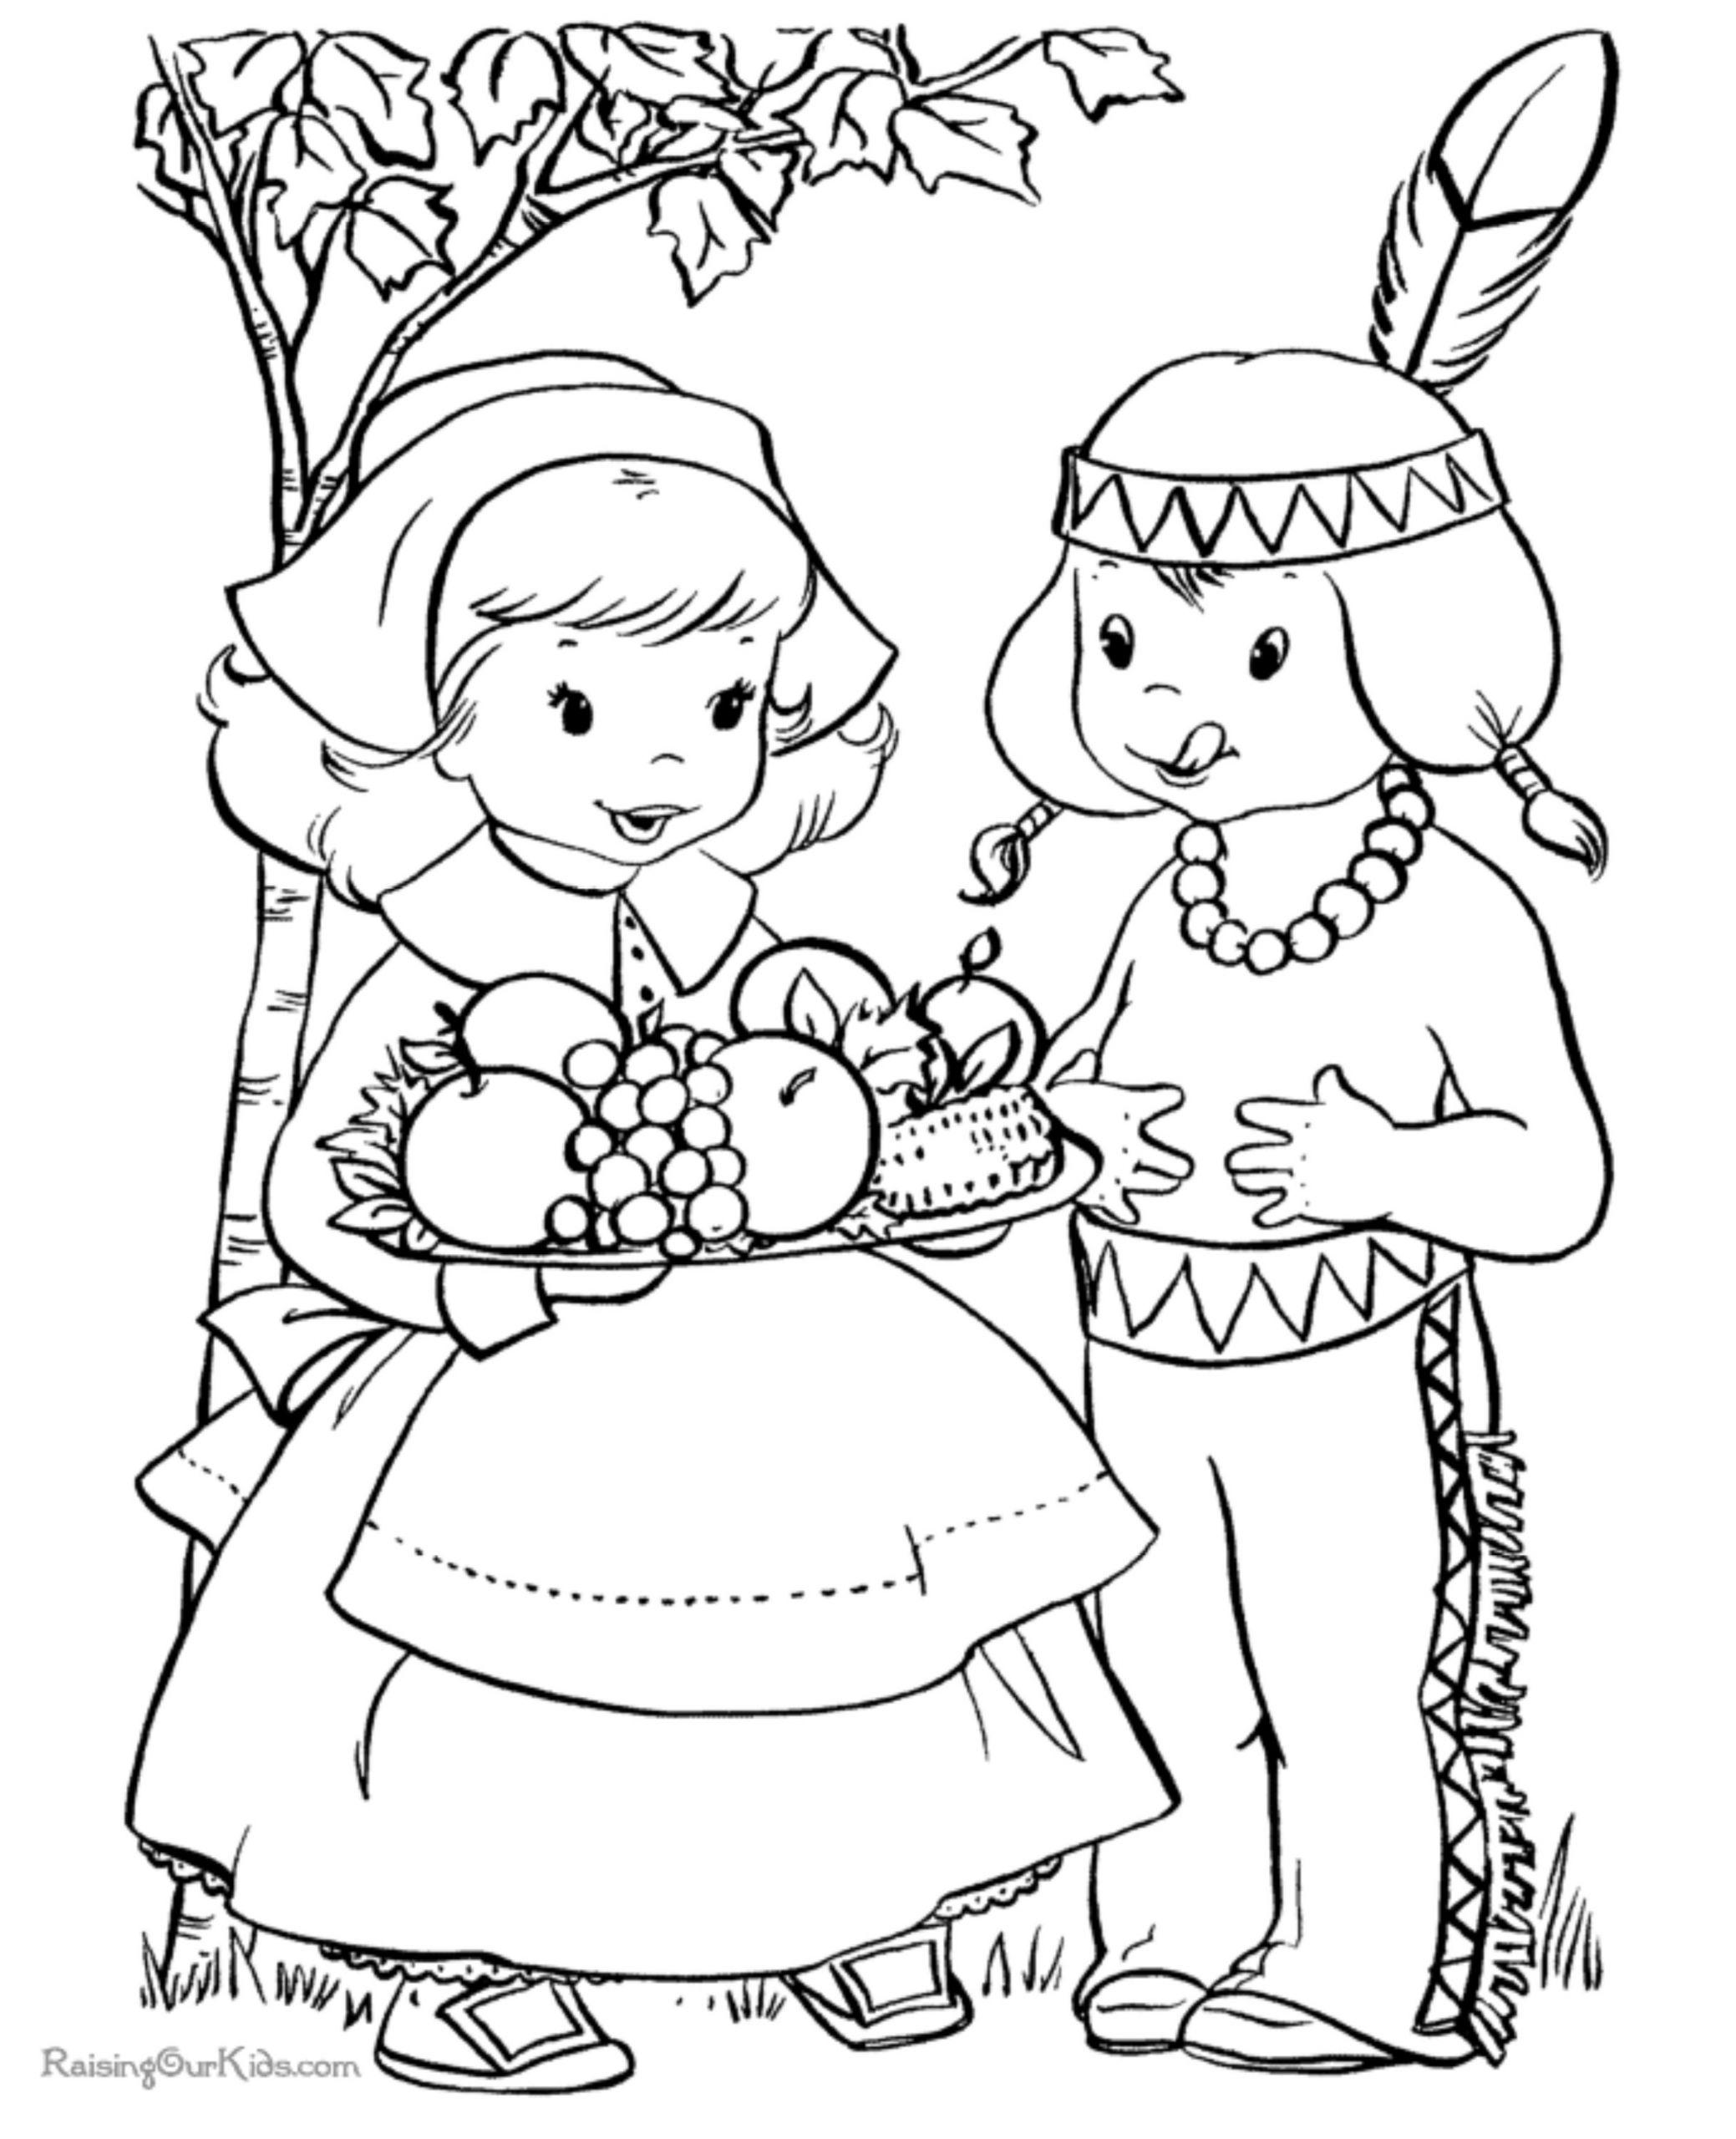 Thanksgiving Coloring Pages For Kids
 Kid’s Coloring Pages Northern News